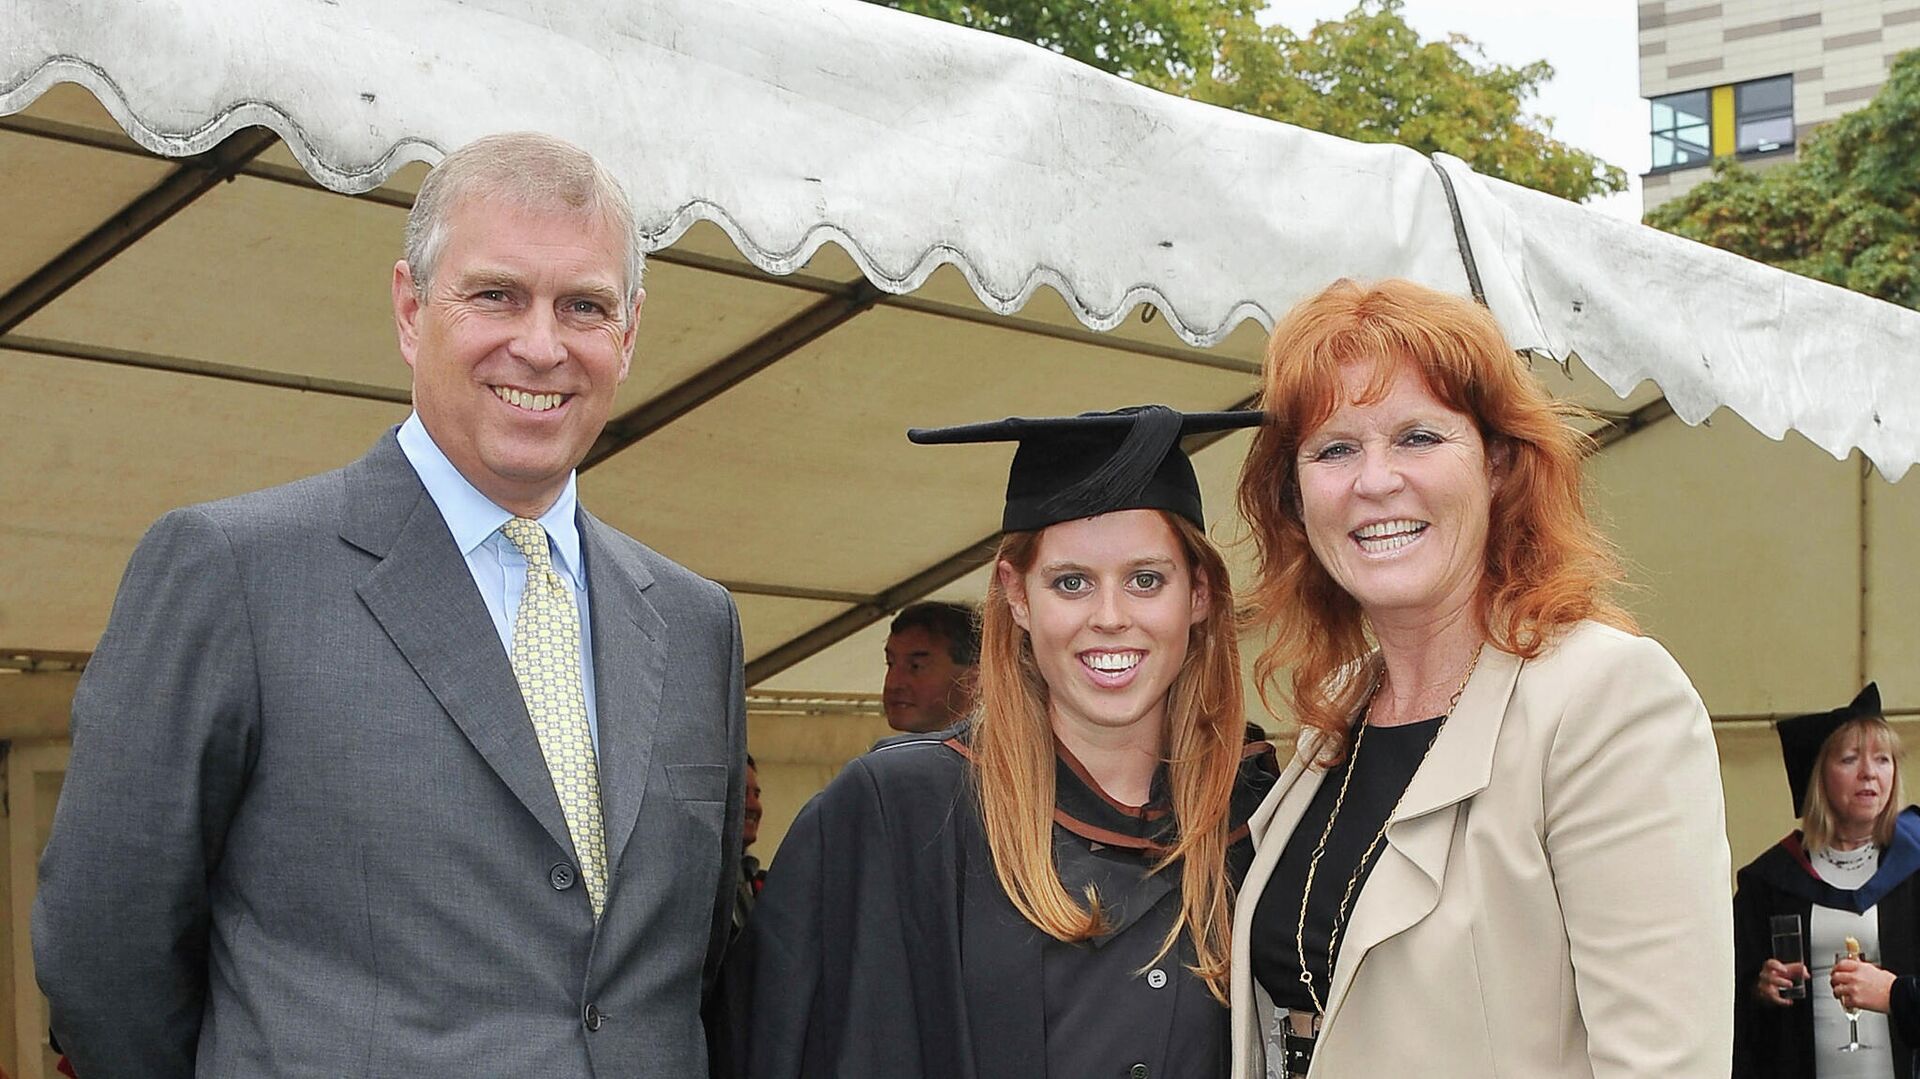 Princess Beatrice (C) poses for photograph with her parents, Britain's Prince Andrew, the Duke York (L) and Sarah Ferguson following her graduation - Sputnik International, 1920, 03.10.2021